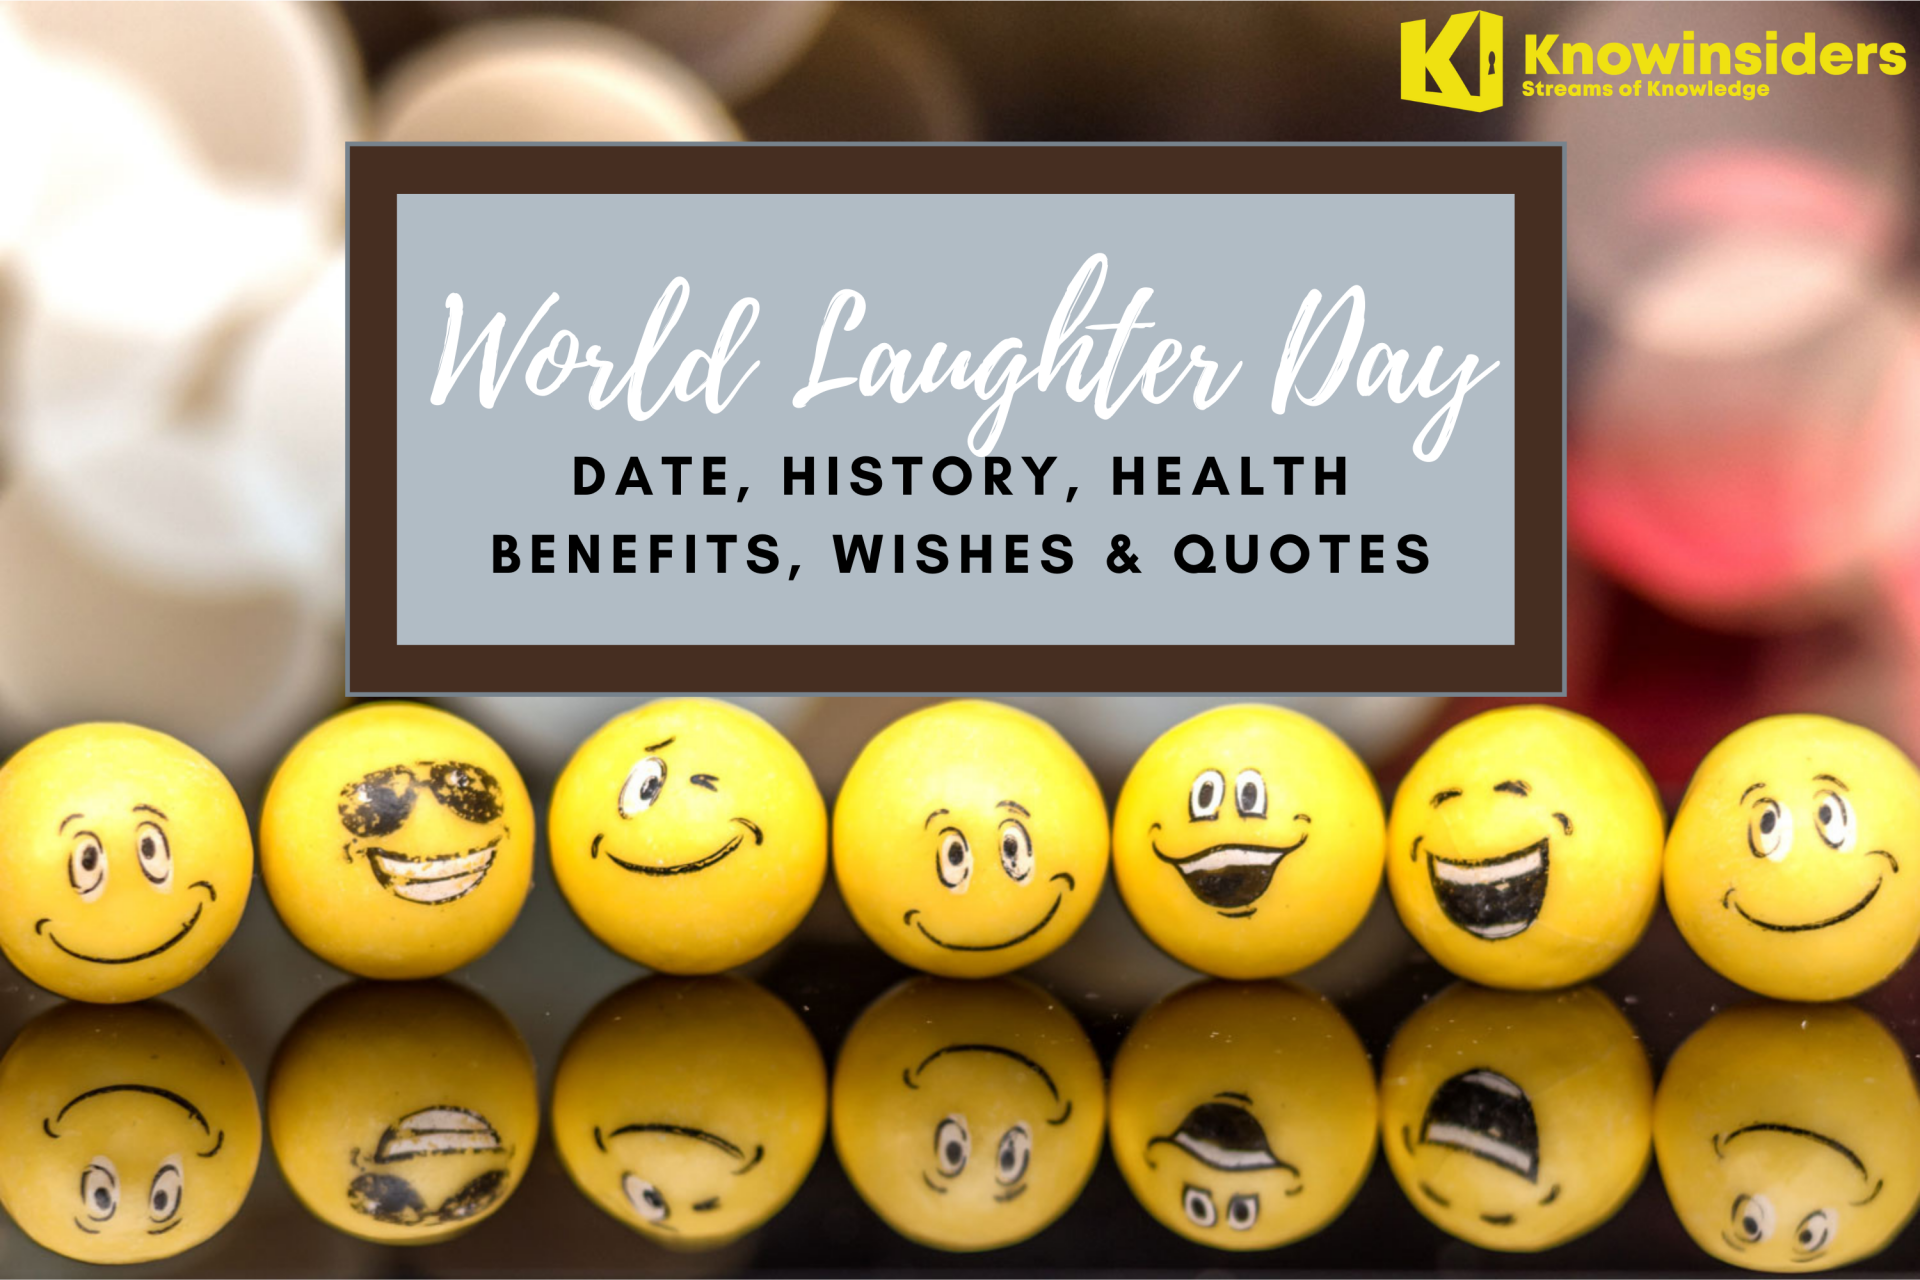 World Laughter Day: Best Wishes, Great Quotes, Date, History and Health Benefits